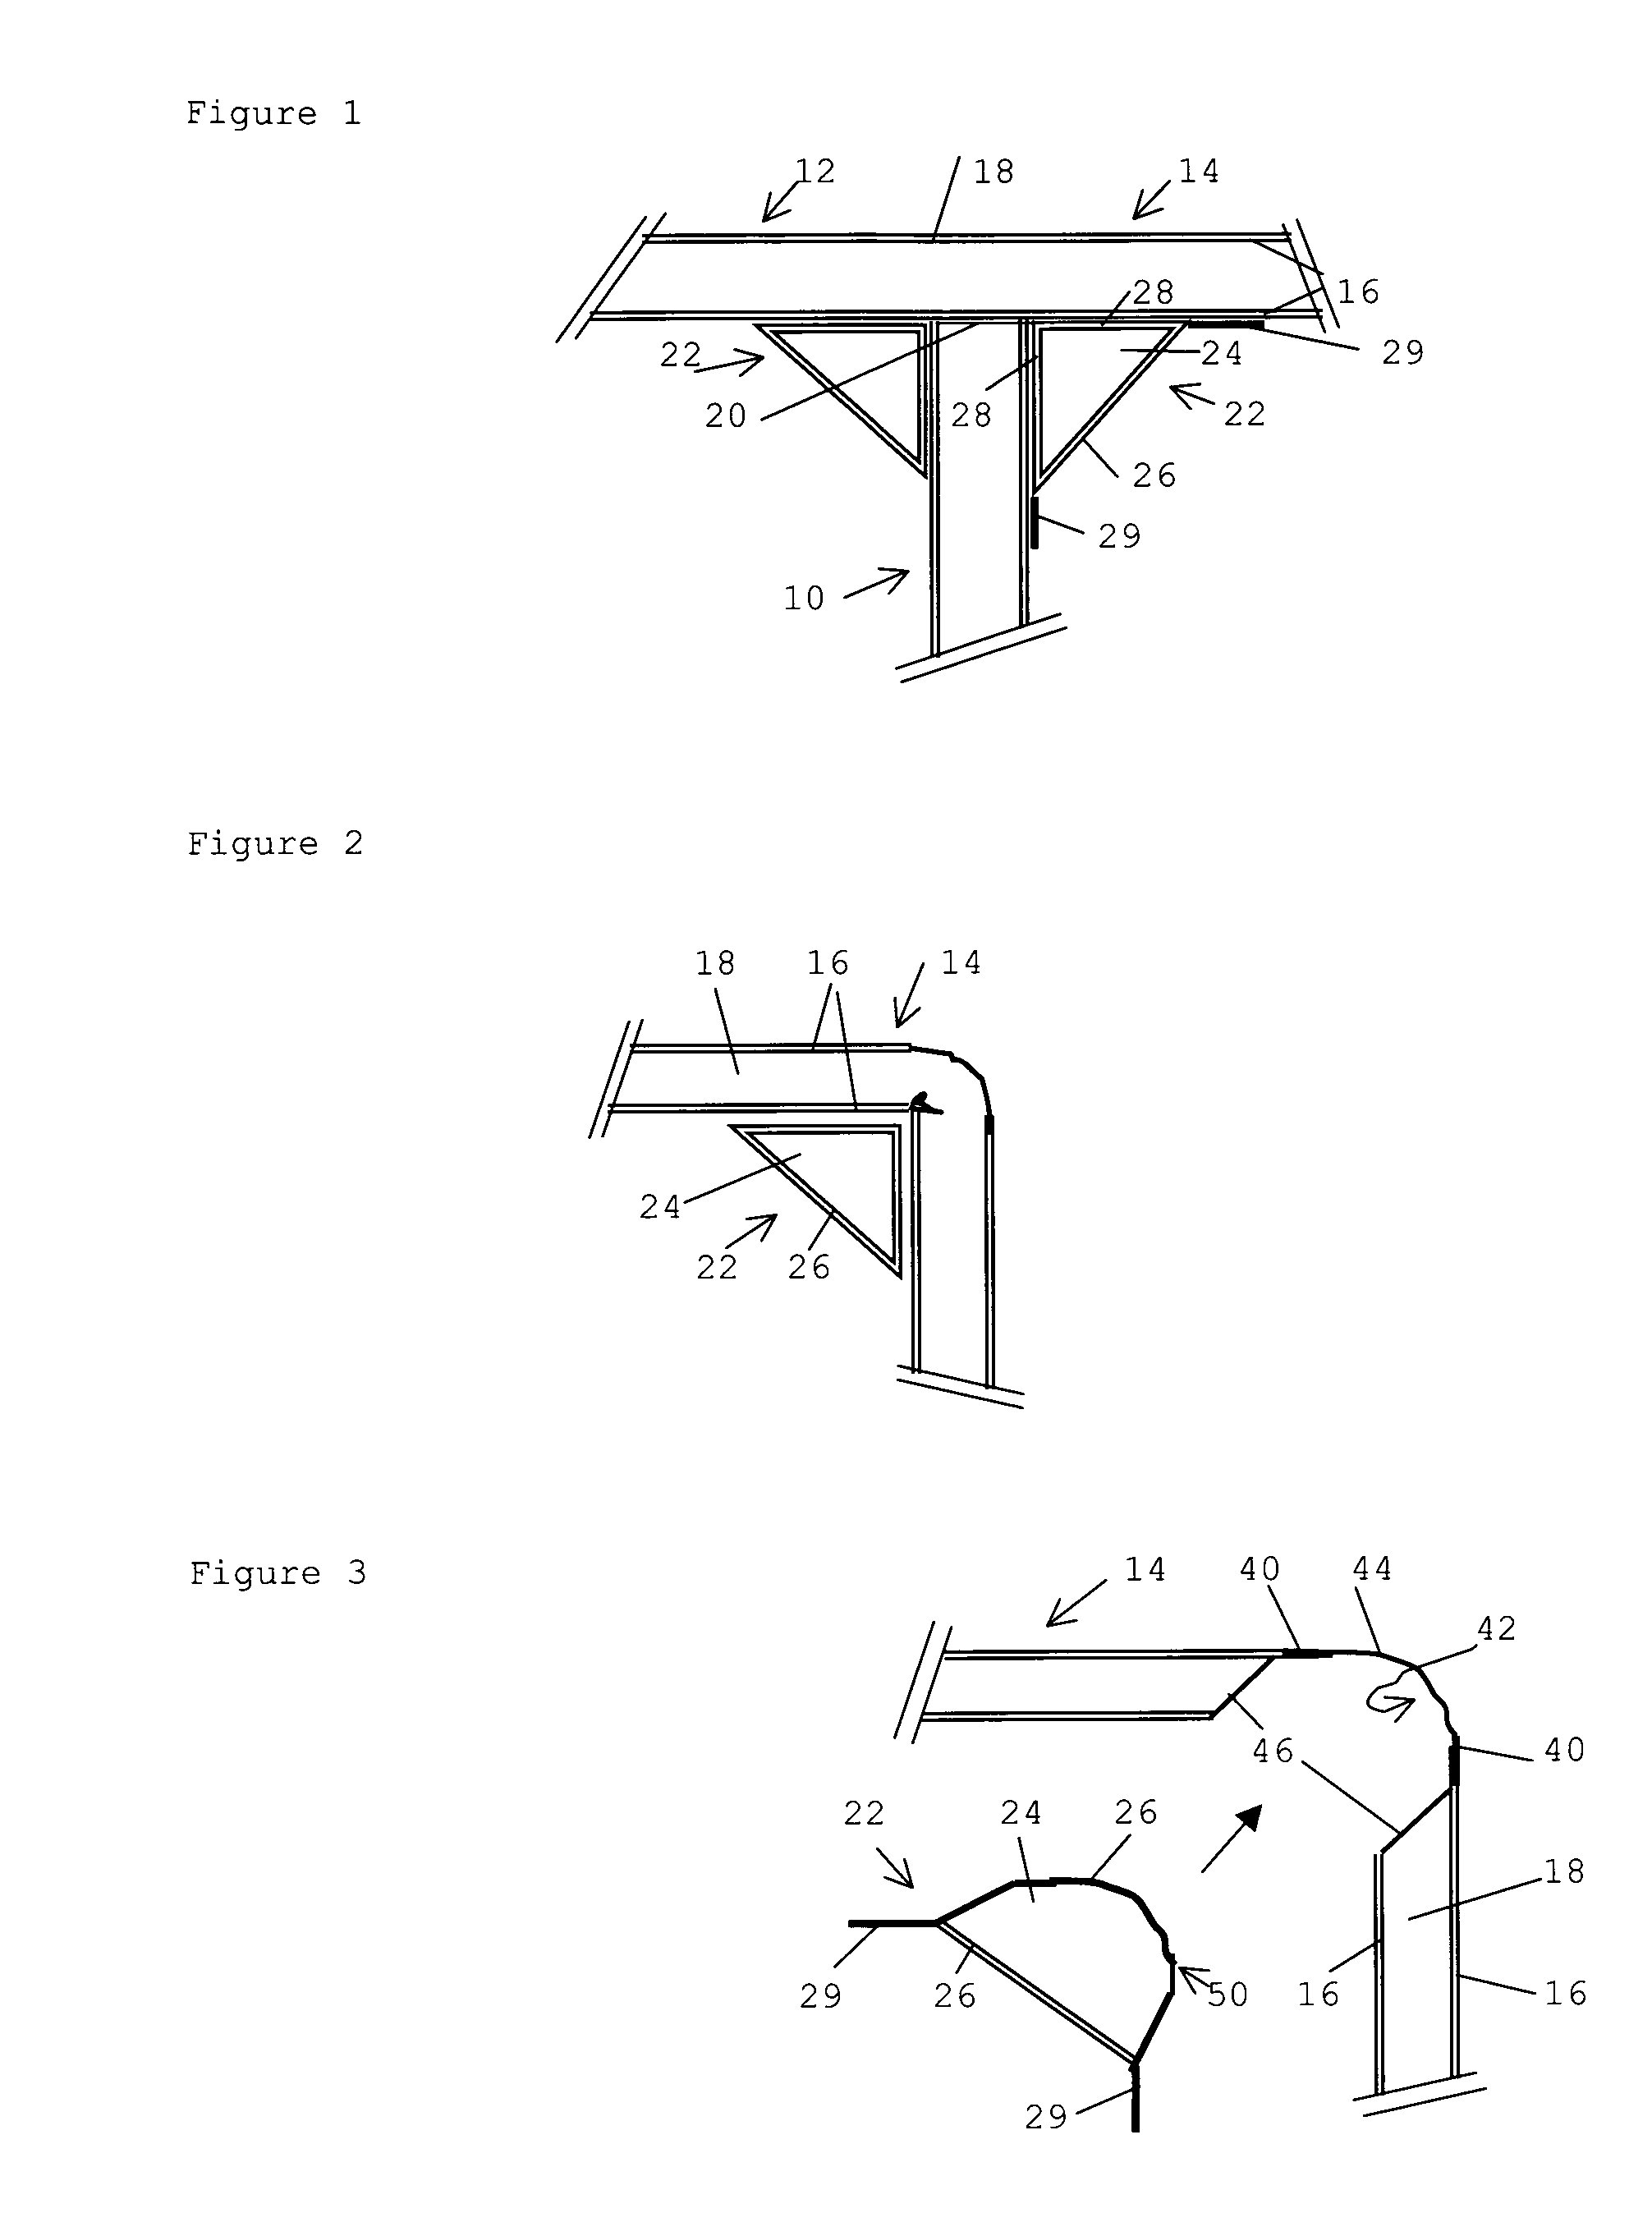 Method for Manufacturing an Object from a Sandwich Structure Having a Reinforced Corner and an Object of this Type